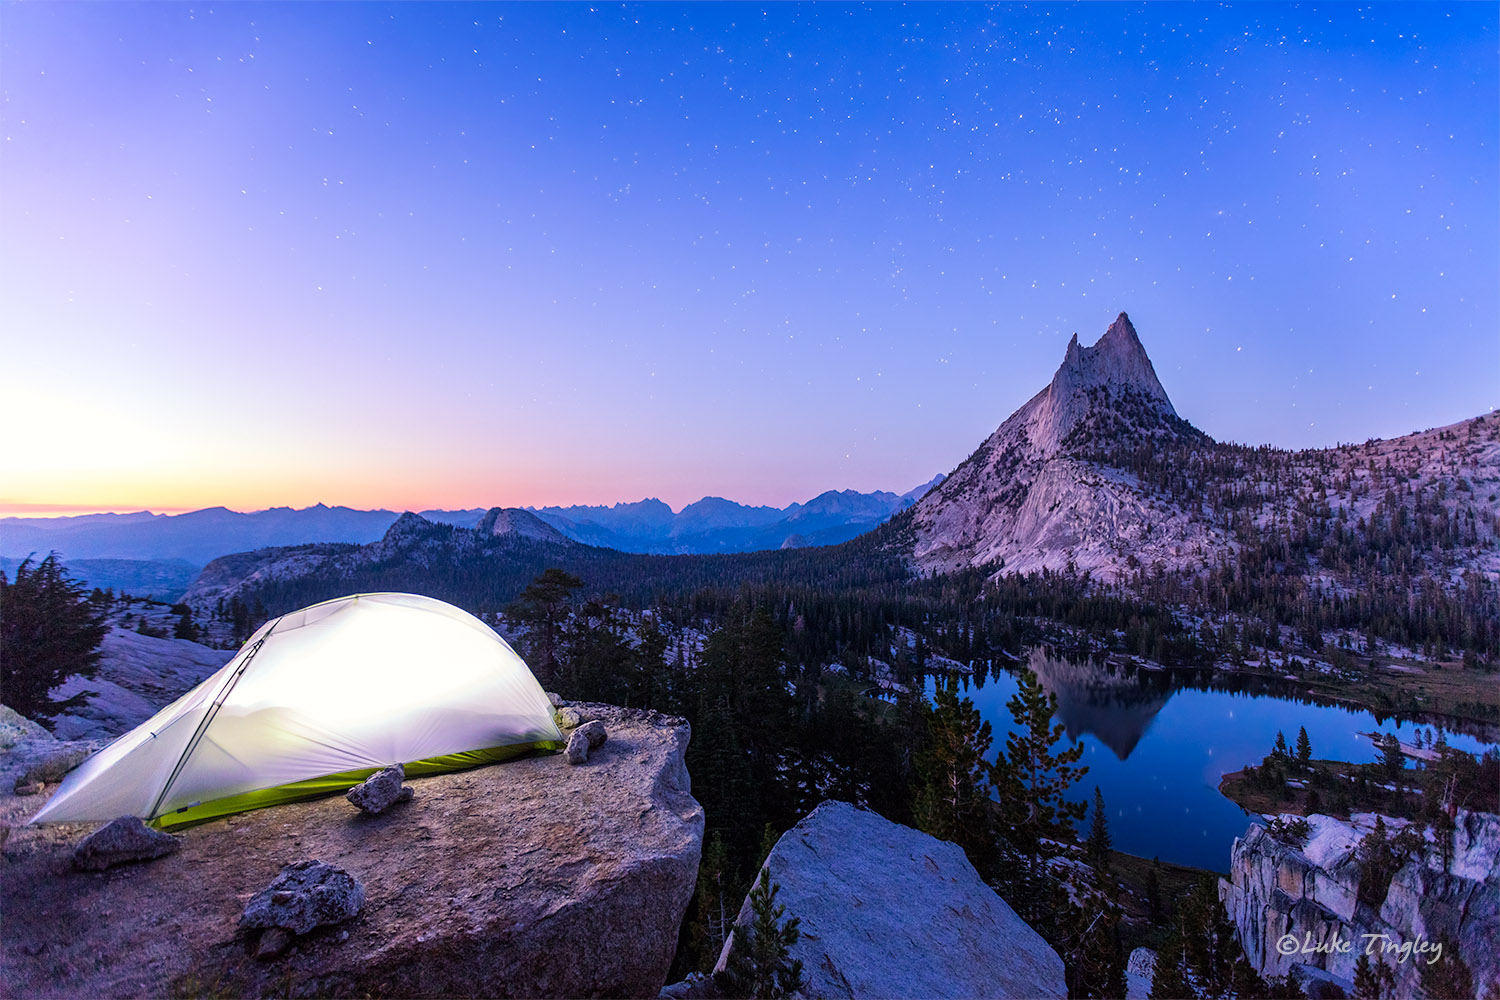 2016, Backcountry, Camping, Cathedral Peak, Tent, Upper Cathederal Lake, Wilderness, Yosemite, Yosemite National Park, august